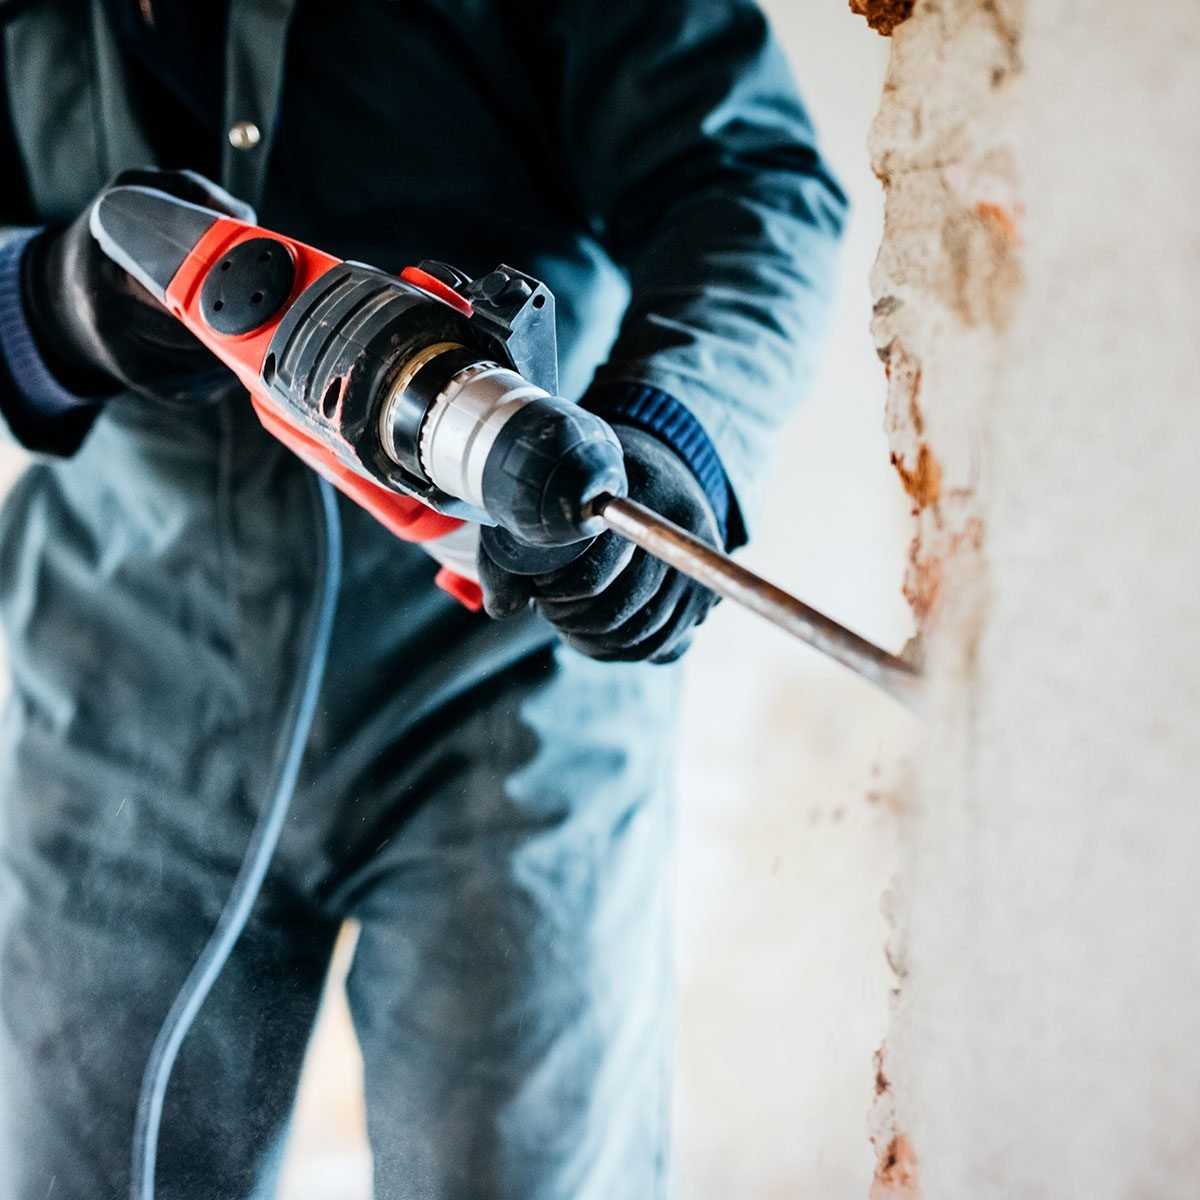 What is a Rotary Hammer Drill?